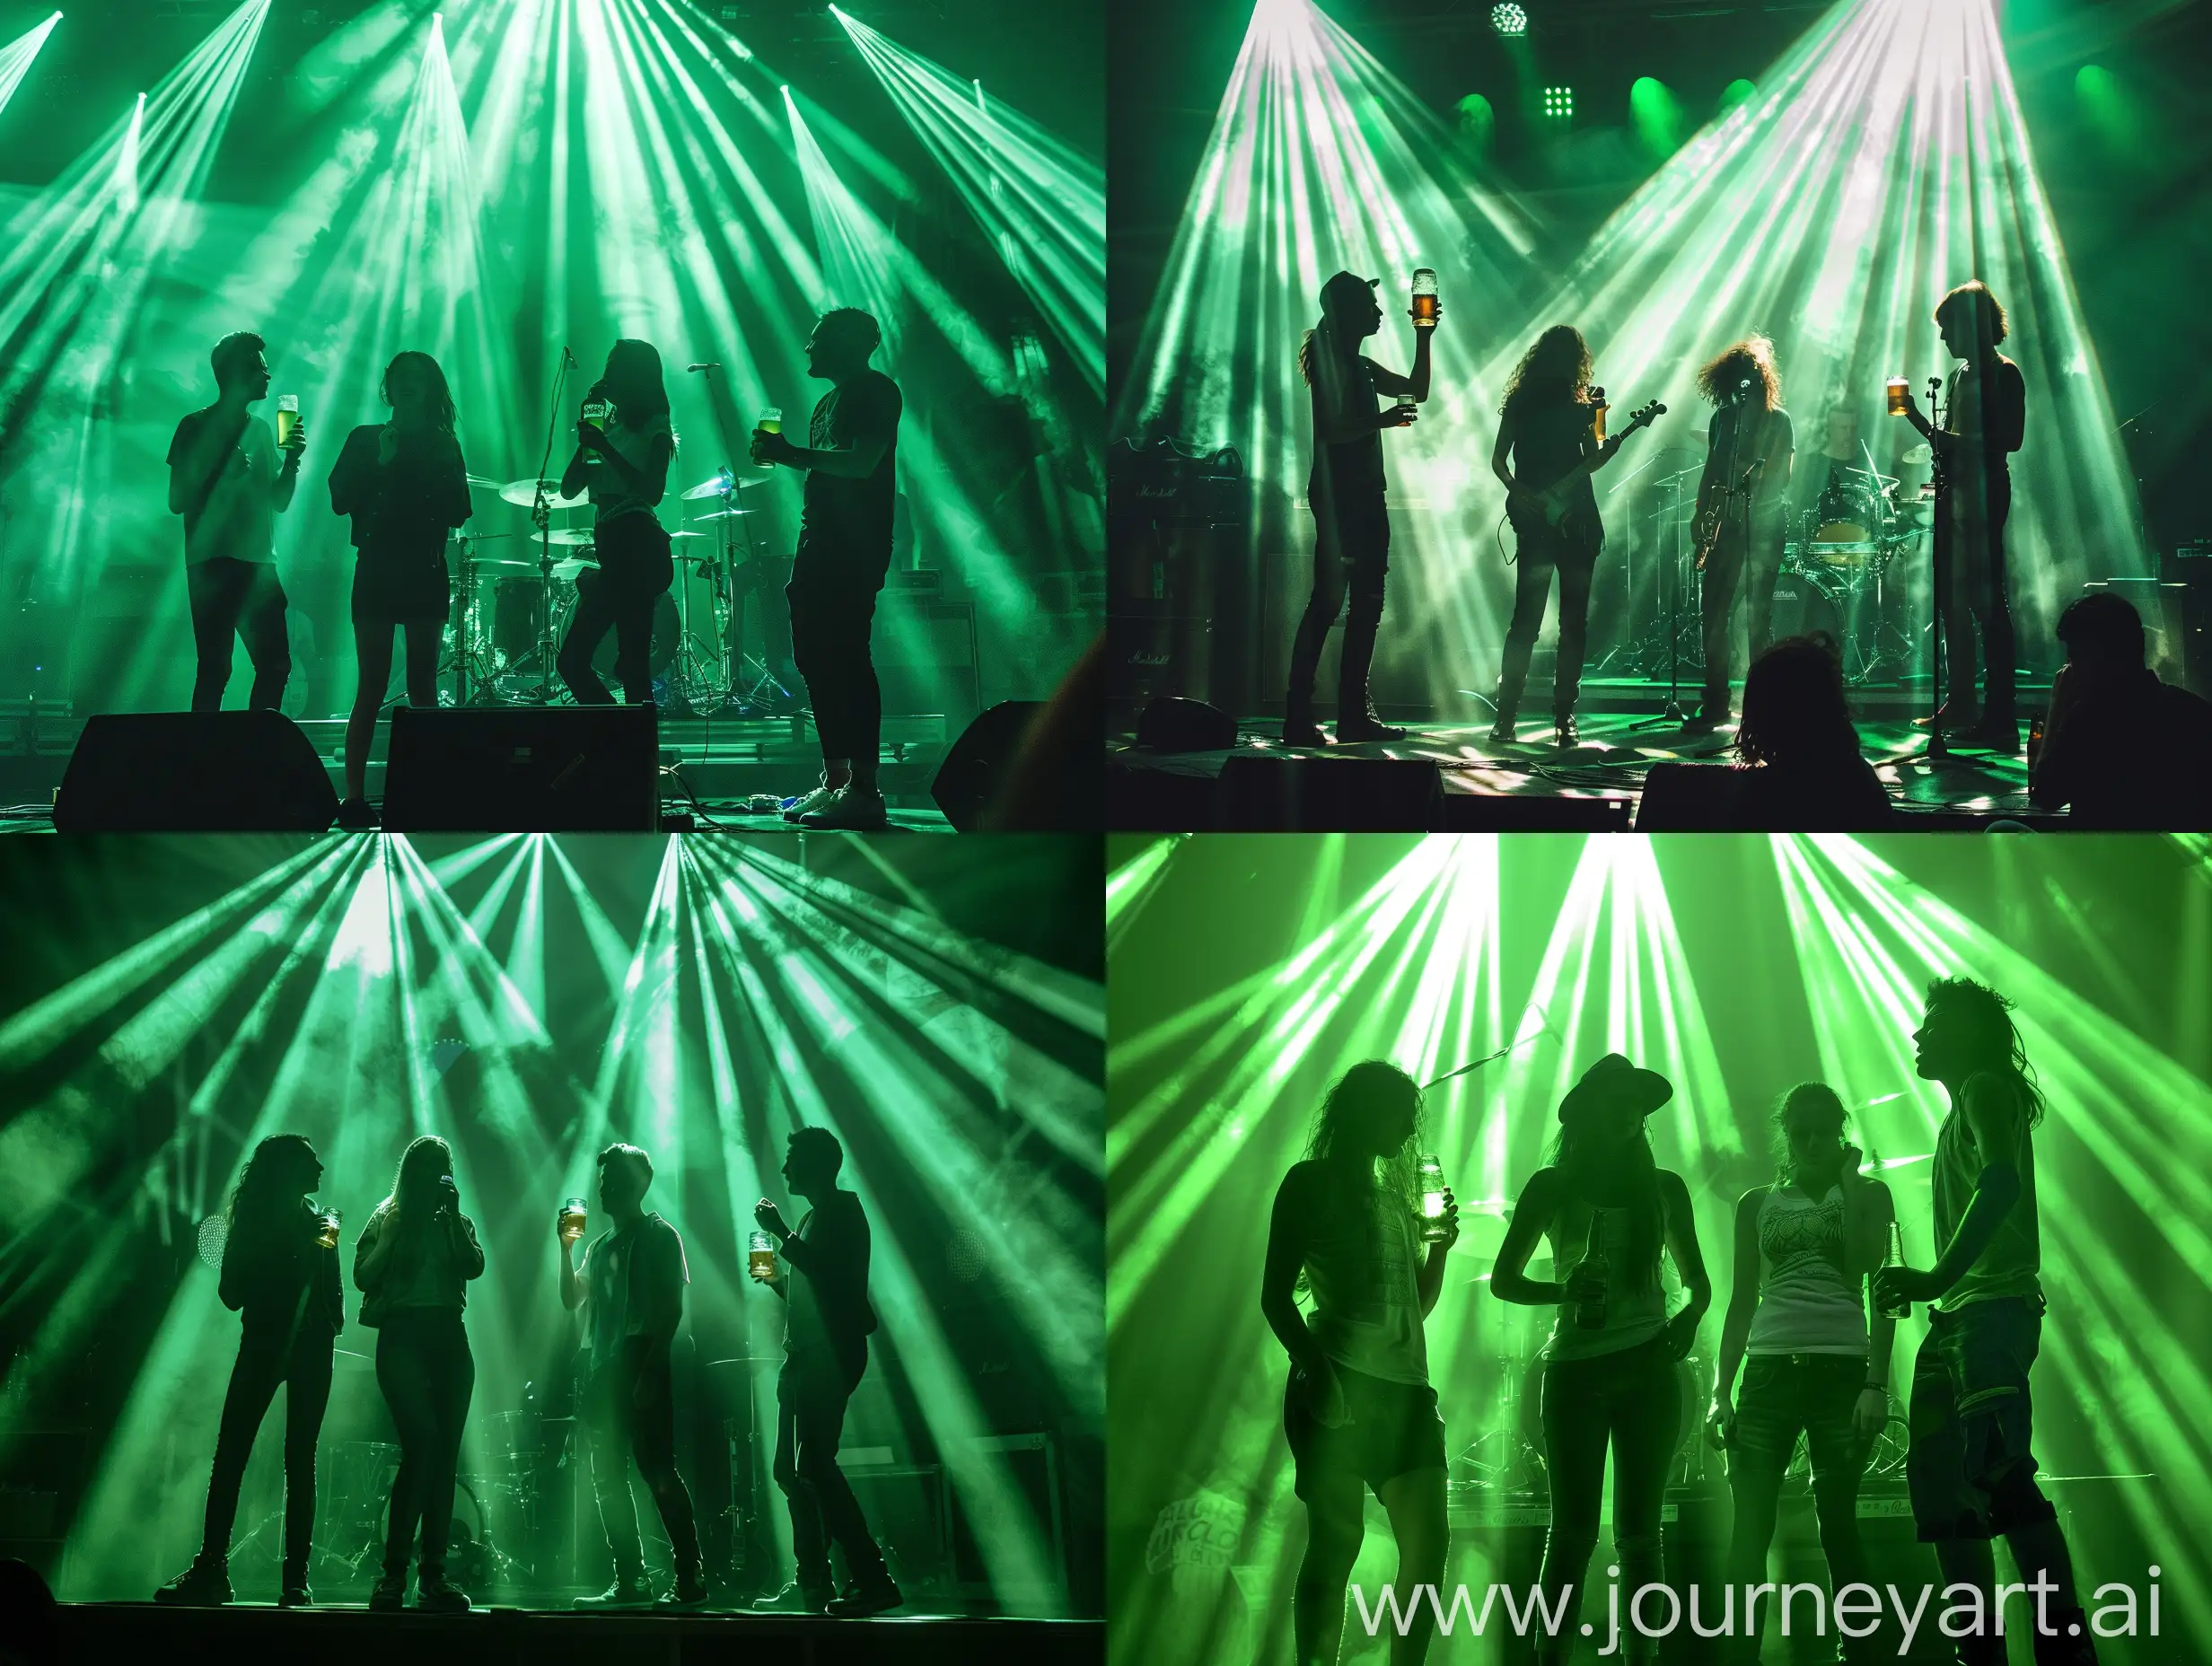 a company of four young people stands on stage in the green rays of light music with a rock band, they drink beer, dance and enjoy the moment